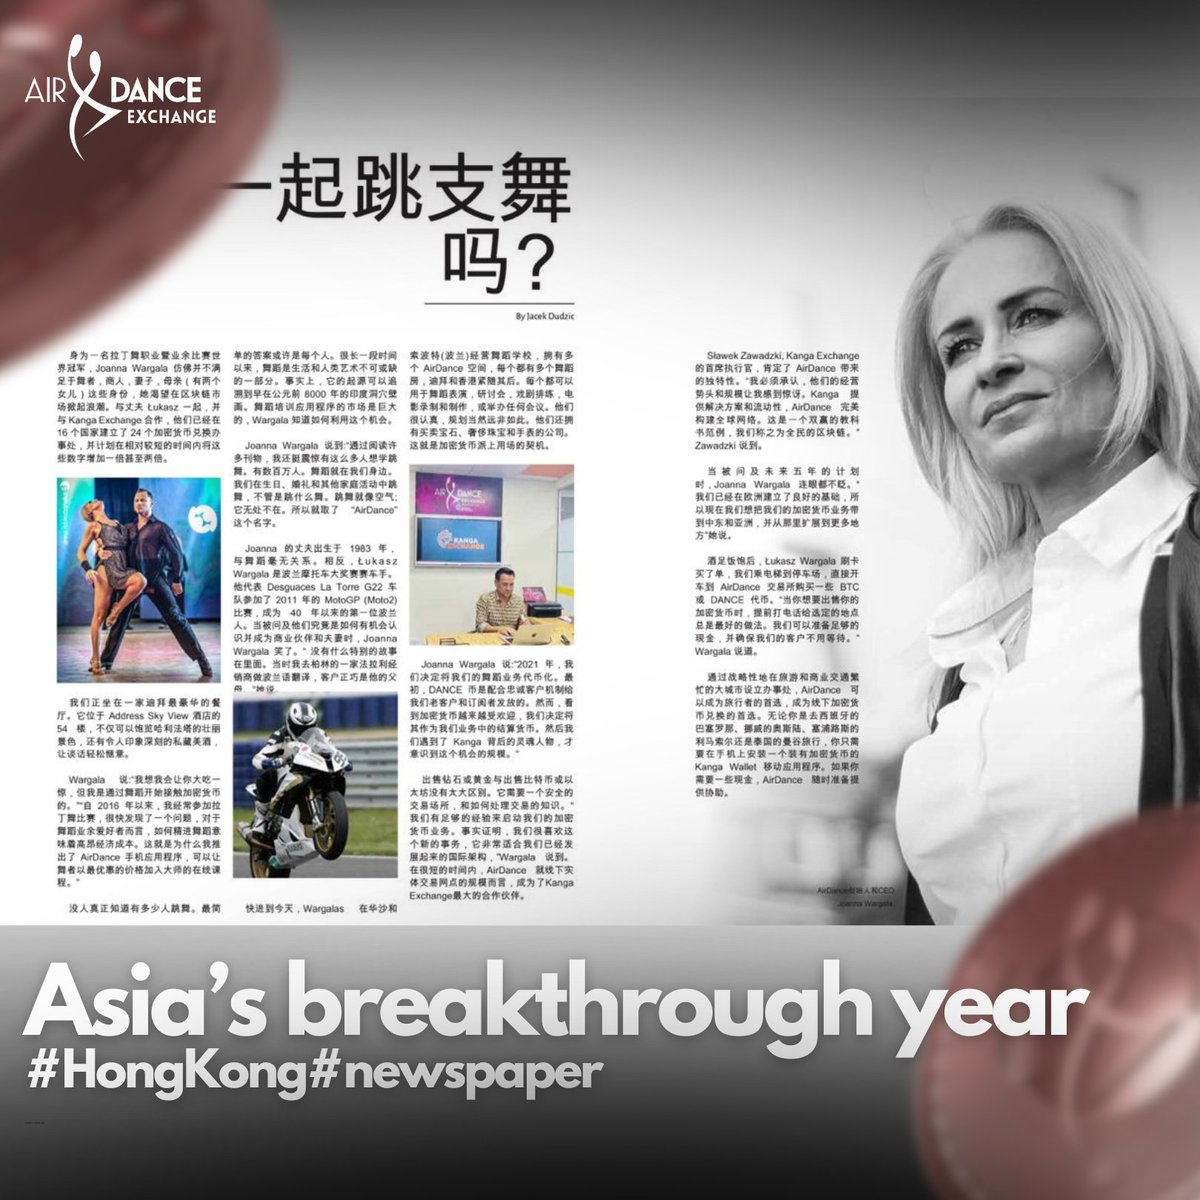 🚀 What a year for #AirDanceExchange! Featured in a major Asian newspaper, our journey of expansion & setting new benchmarks is highlighted. With our CEO's vision & our innovative Hong Kong office, we're celebrating growth & aiming higher. Here's to more milestones! 🌏✨